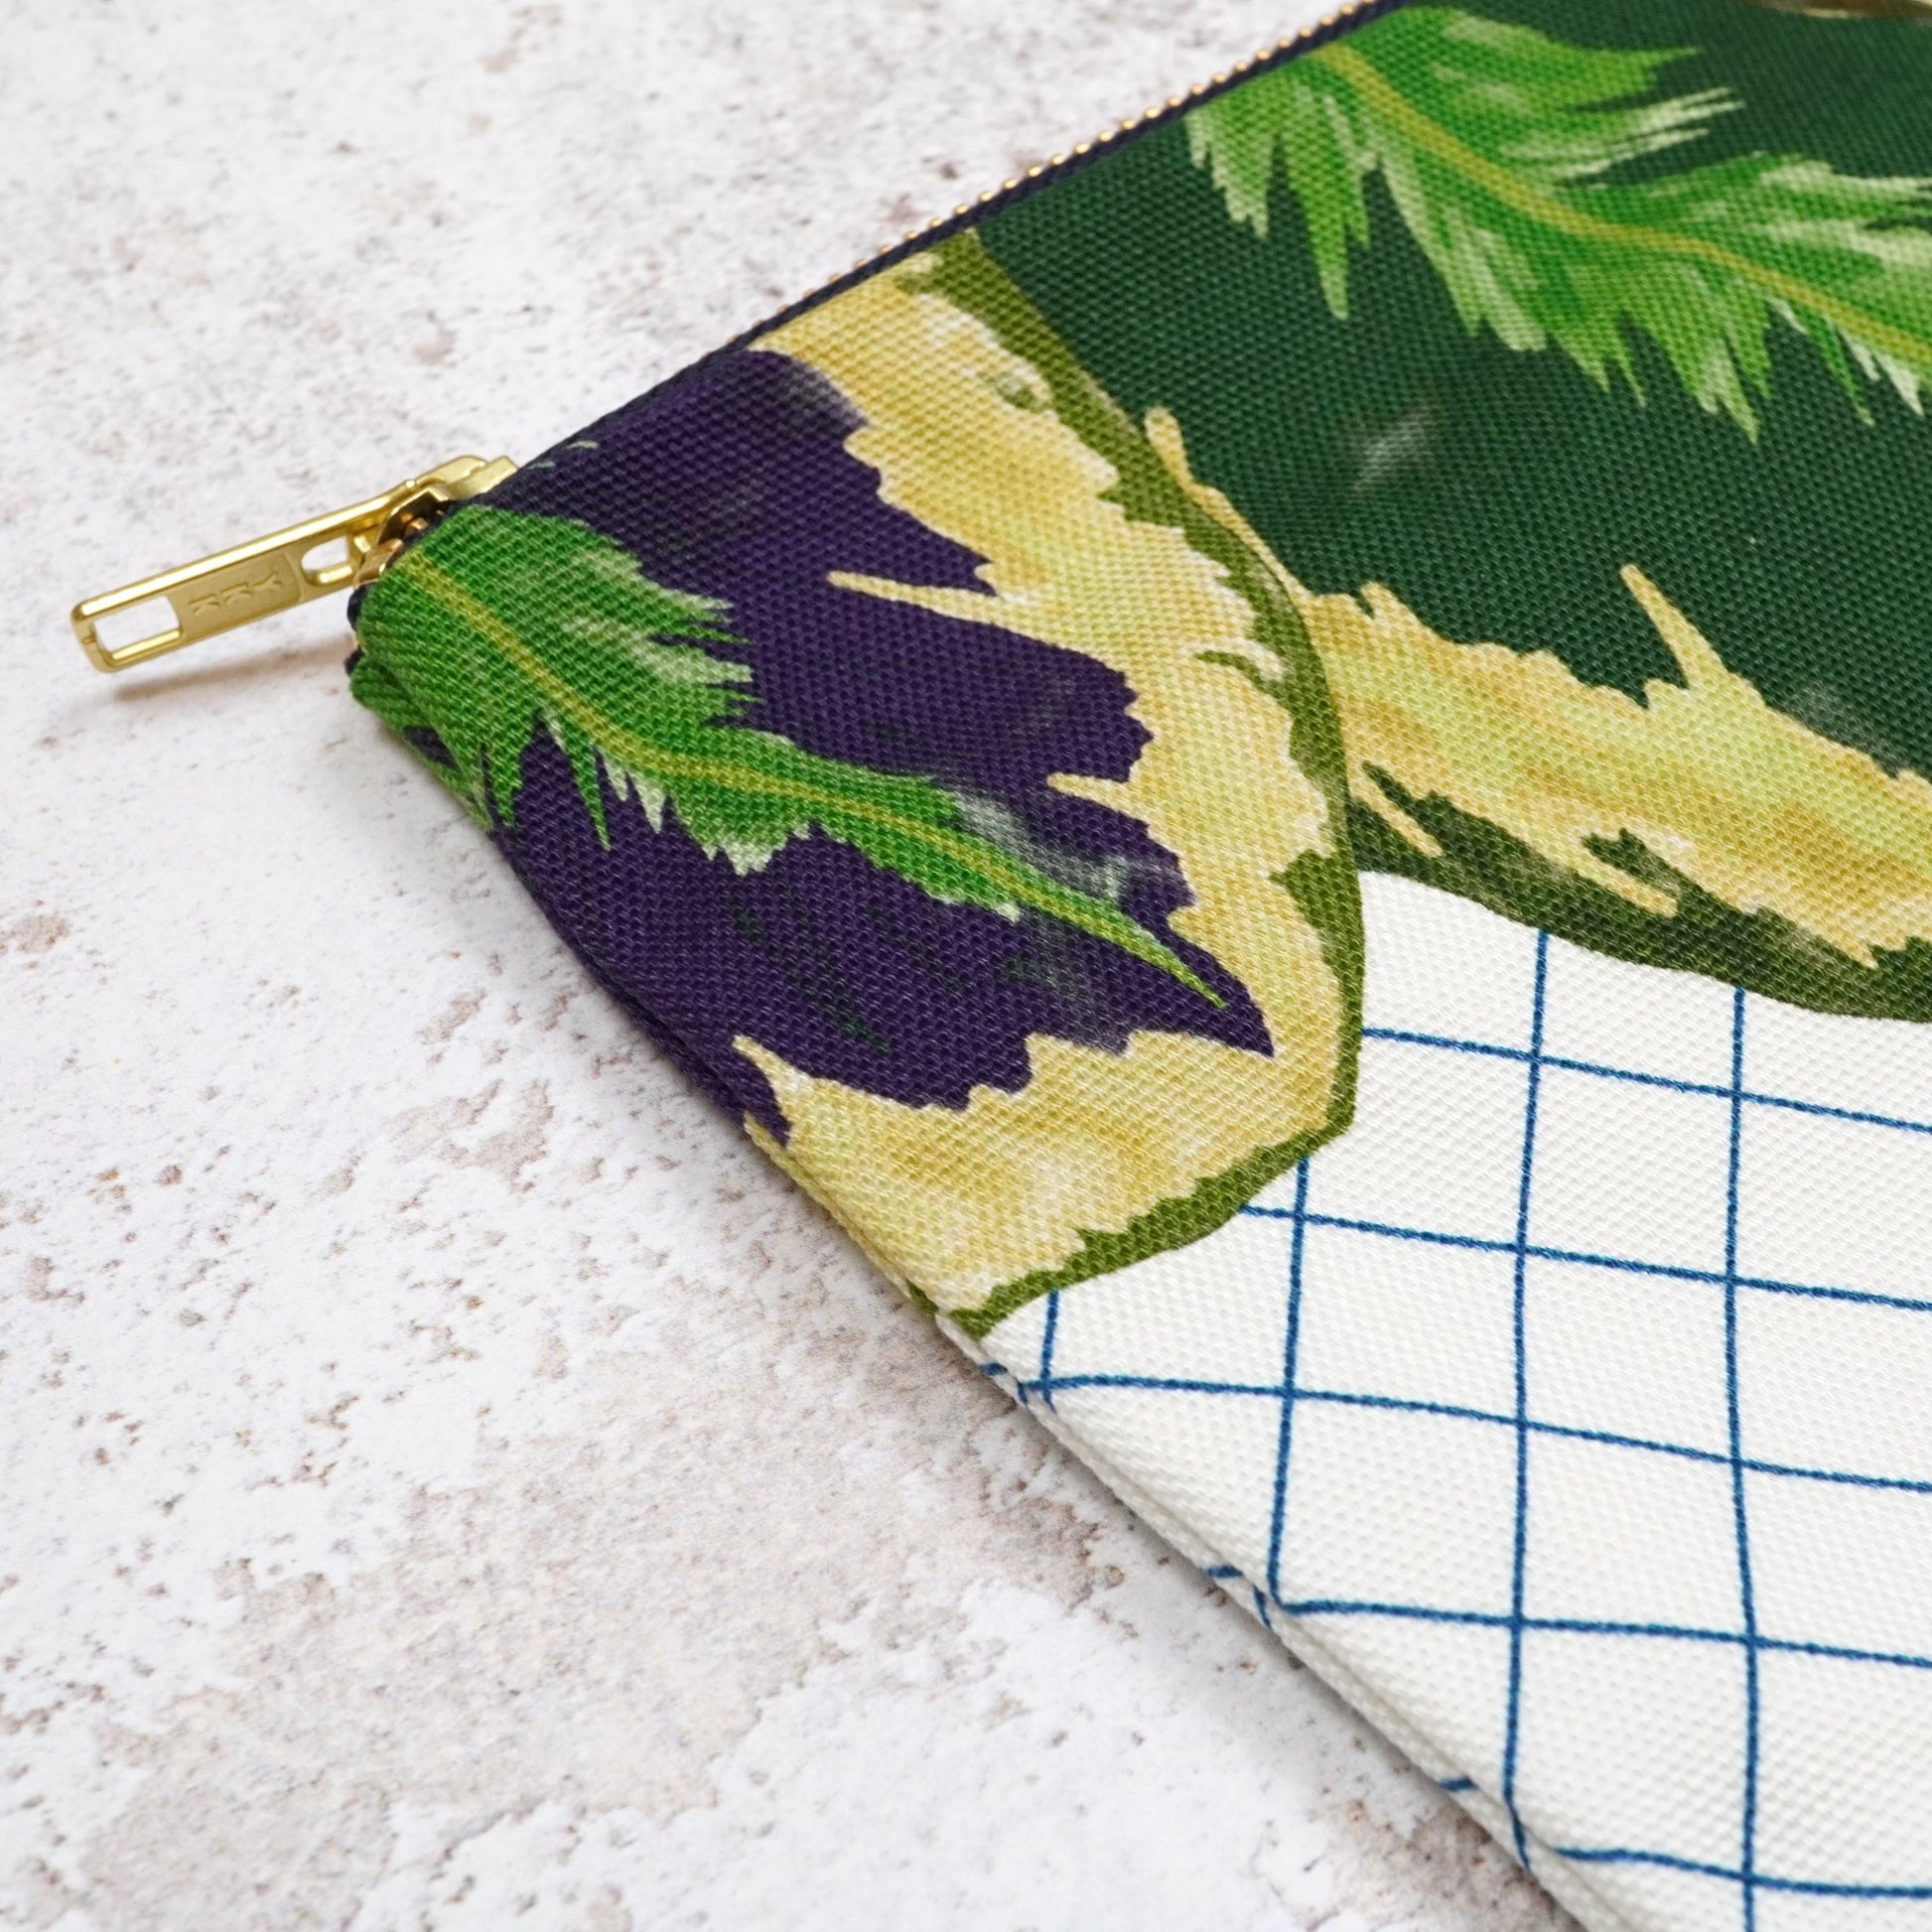 Nature inspired toiletry bag